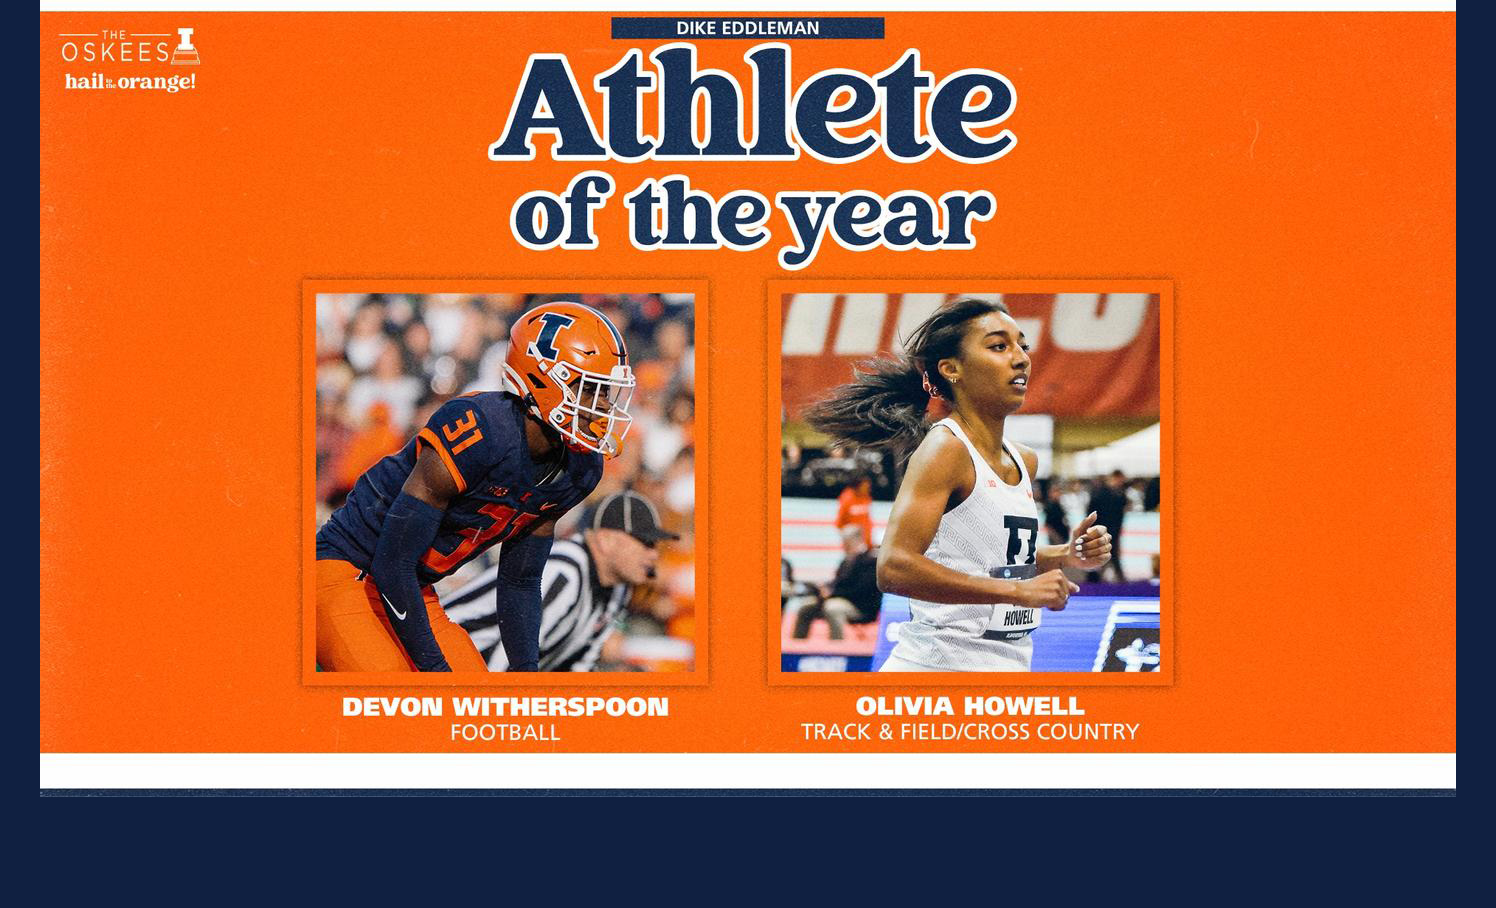 graphic courtesy of Intercollegiate Athletics includes images of Dike Eddleman Award winners Devon Witherspoon and Olivia Howell